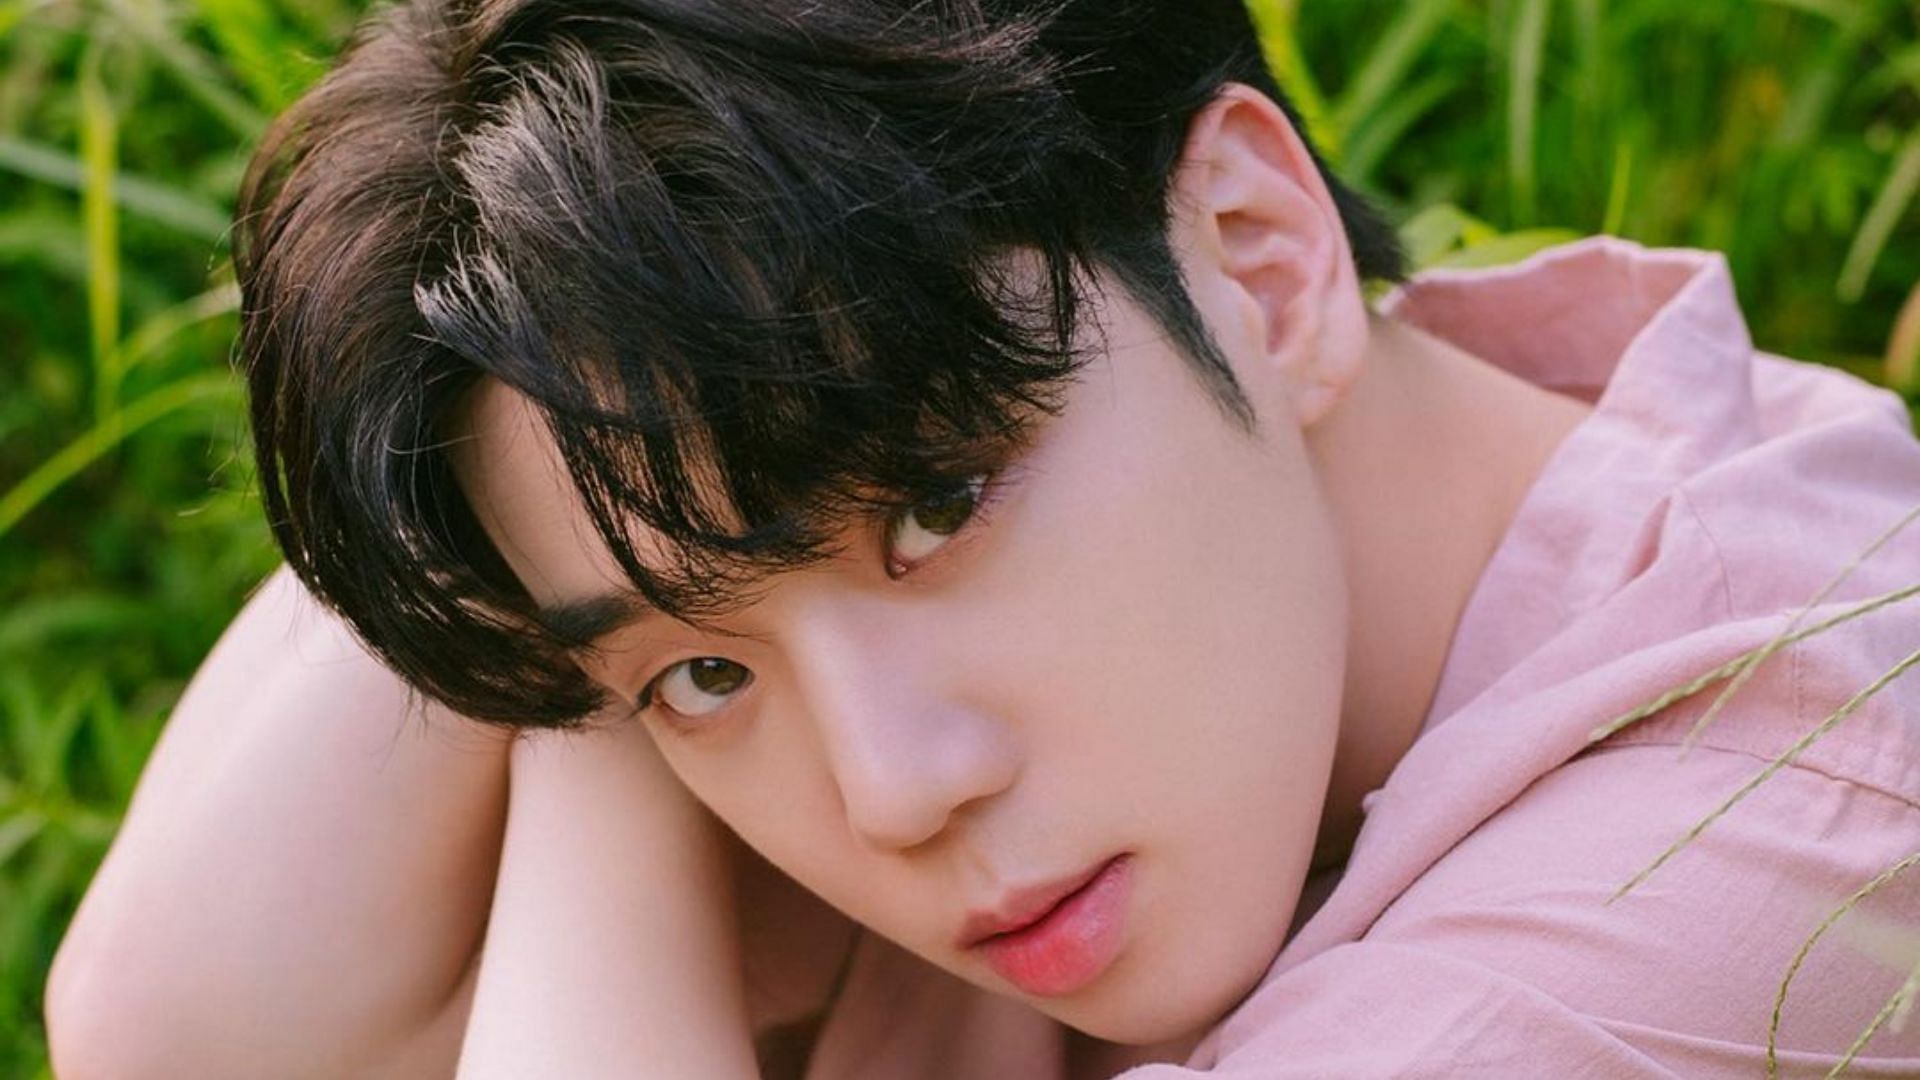 A.C.E. Kim Byeongkwan will officially enlist in the army (Image via Instagram)